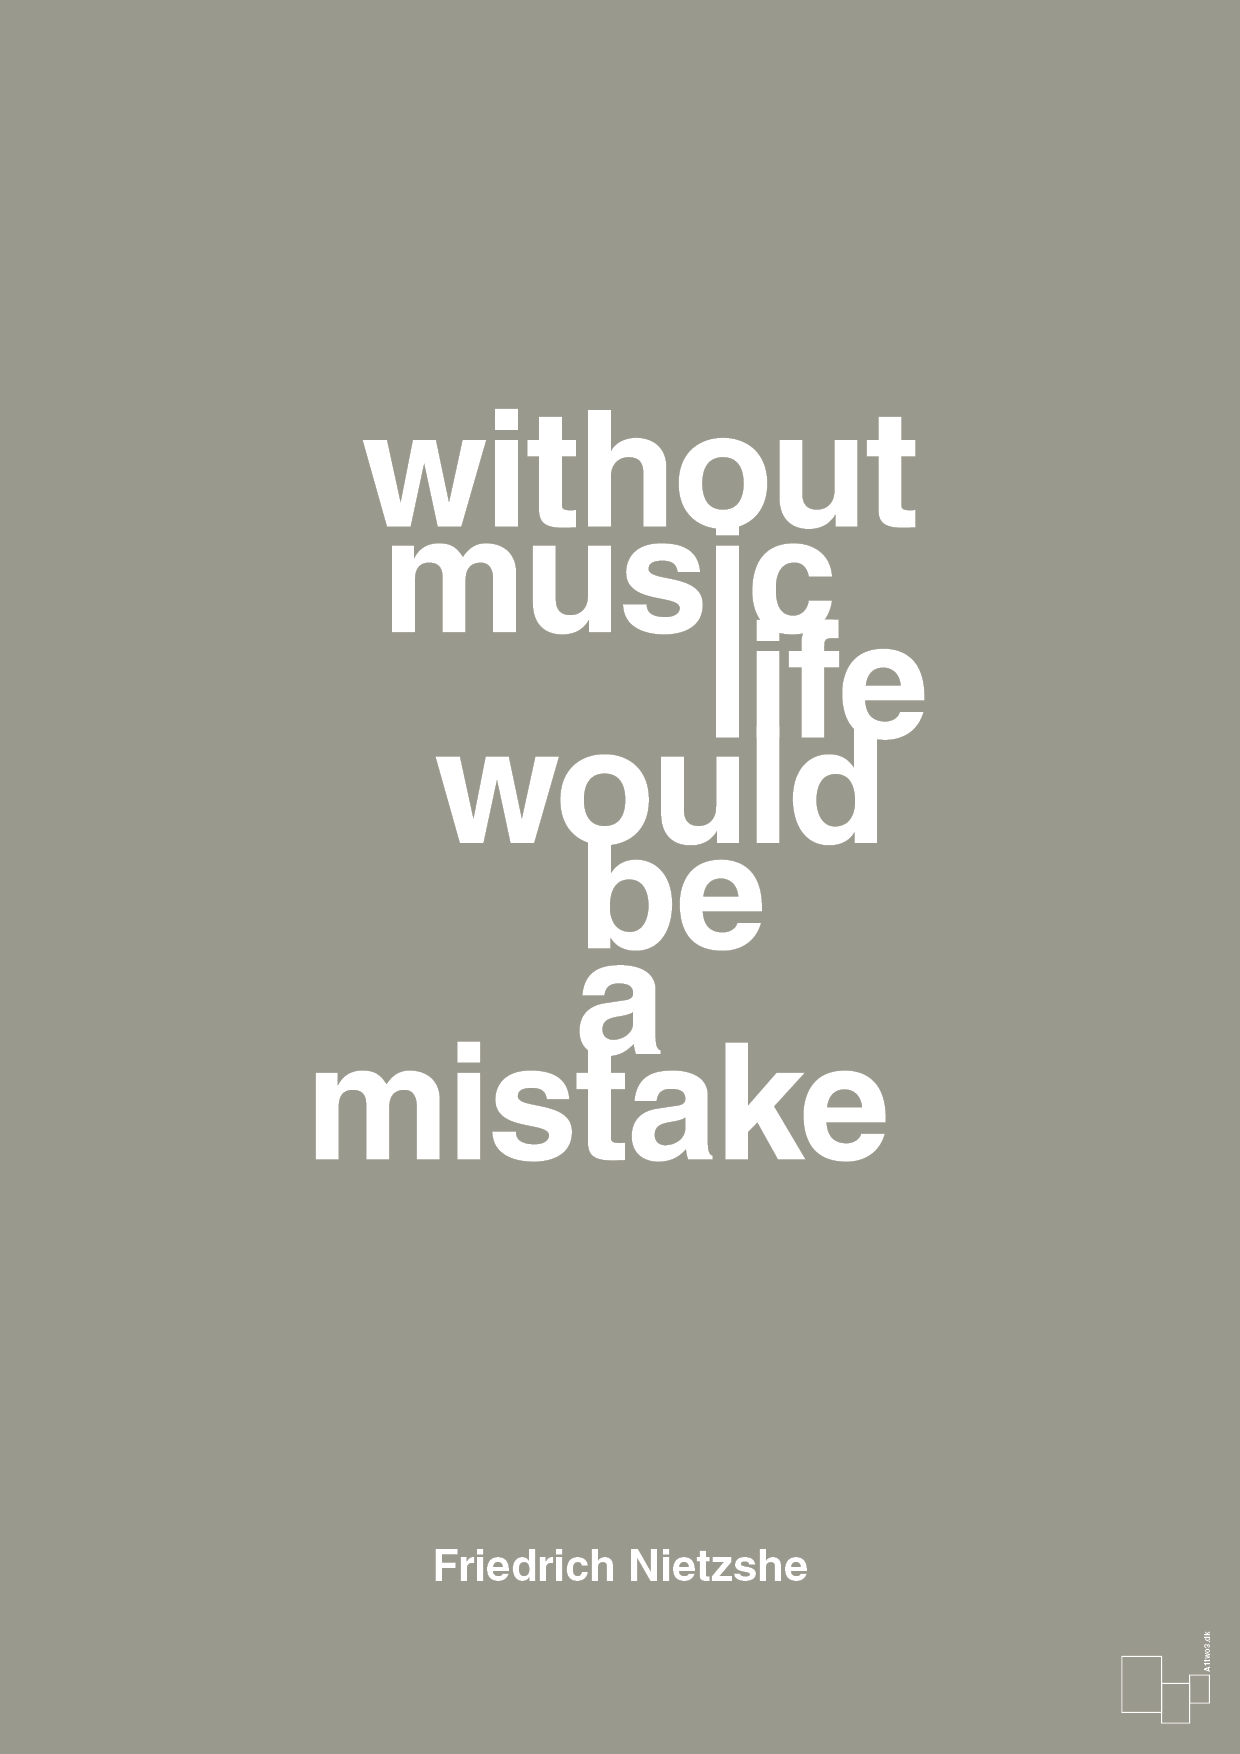 without music life would be a mistake - Plakat med Citater i Battleship Gray